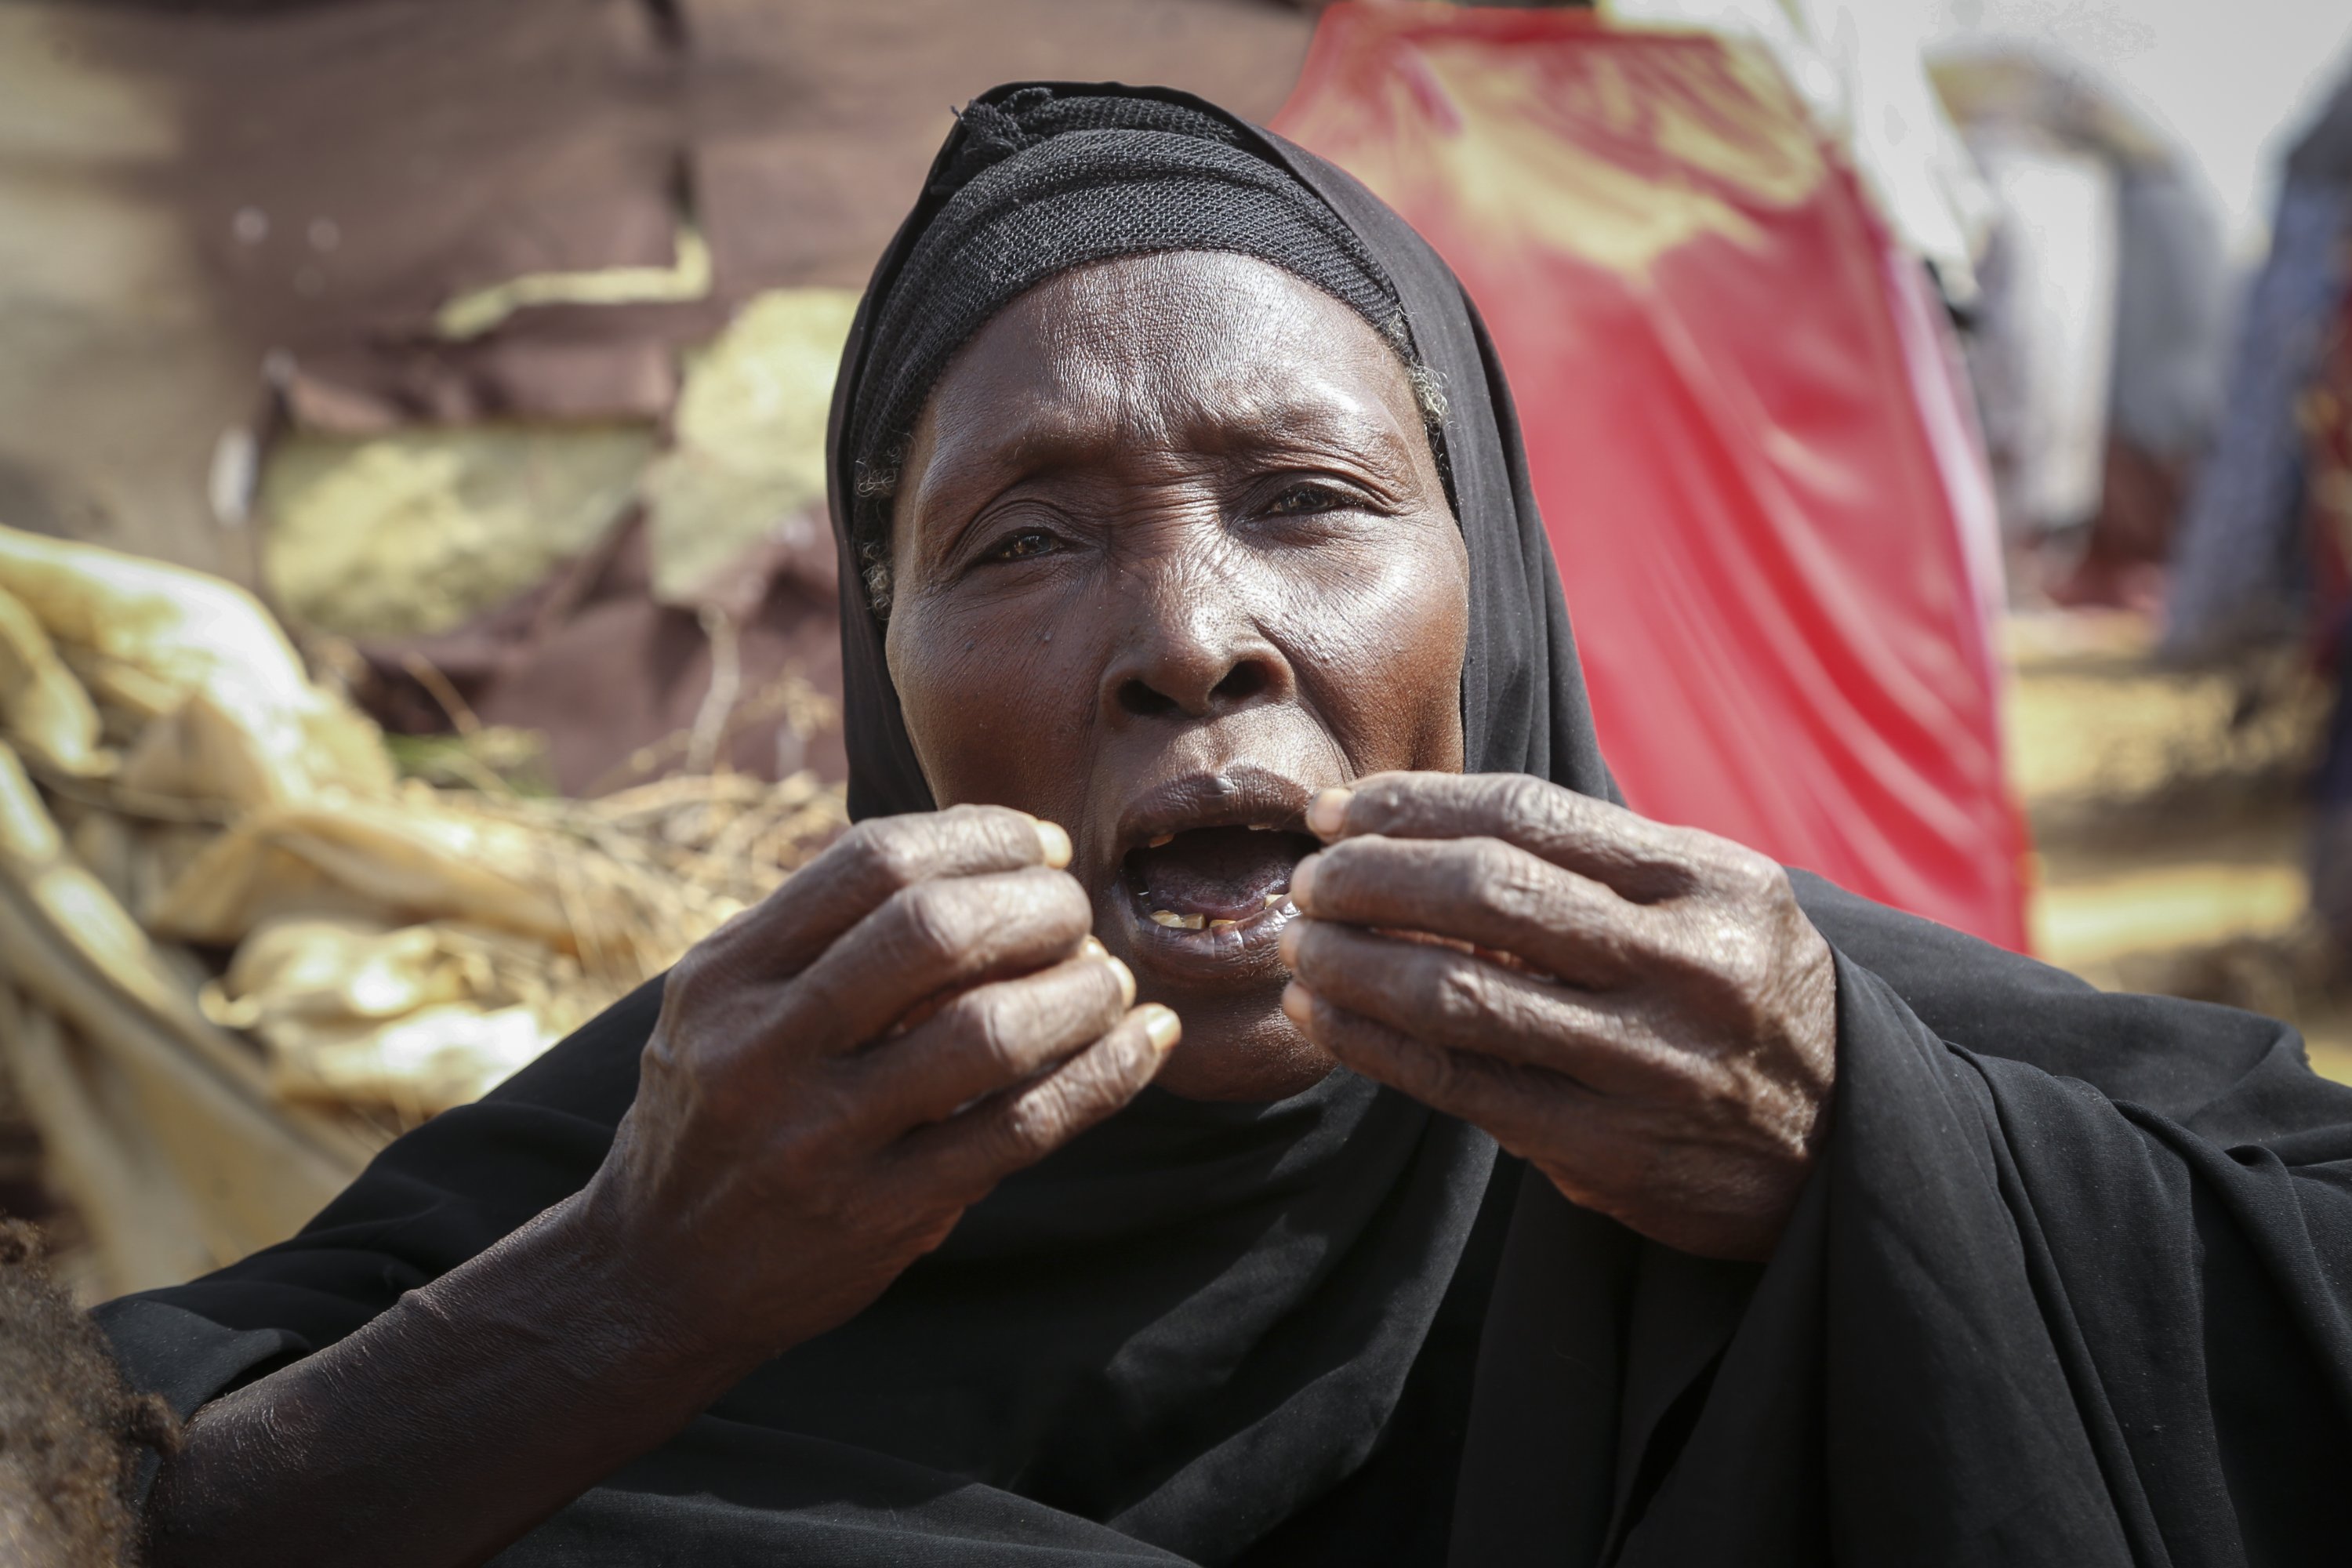 Dhahabo Isse, 60, describes how she fled from the drought without food or water causing four of her children to die of hunger, Mogadishu, Somalia, June 30, 2022. (AP Photo)